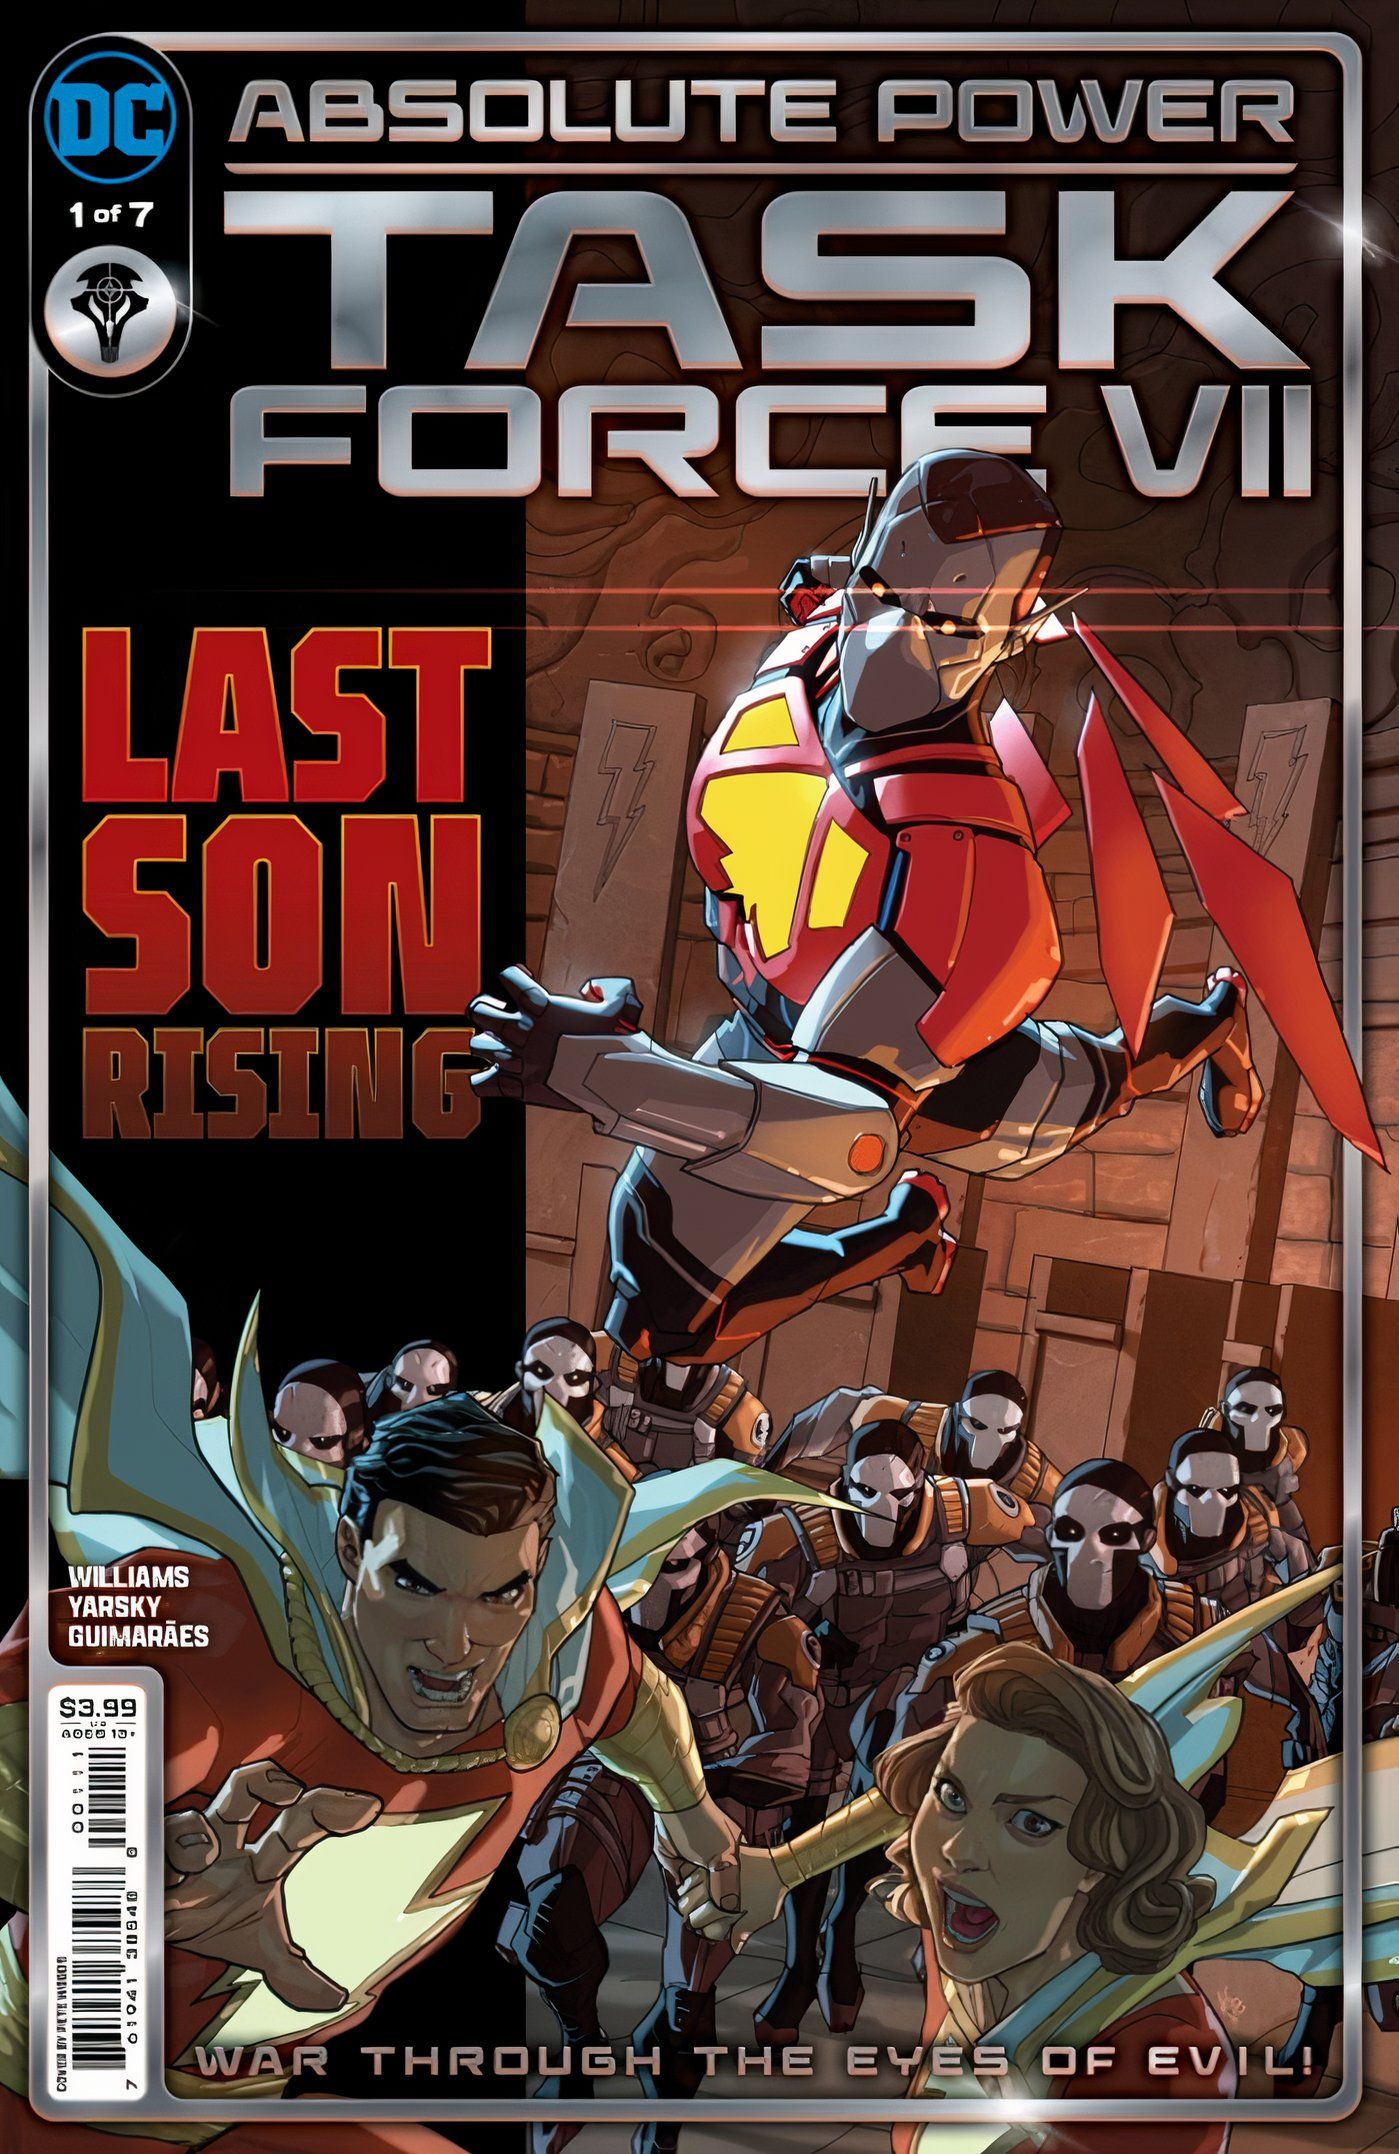 Absolute Power task force vii #1 main cover